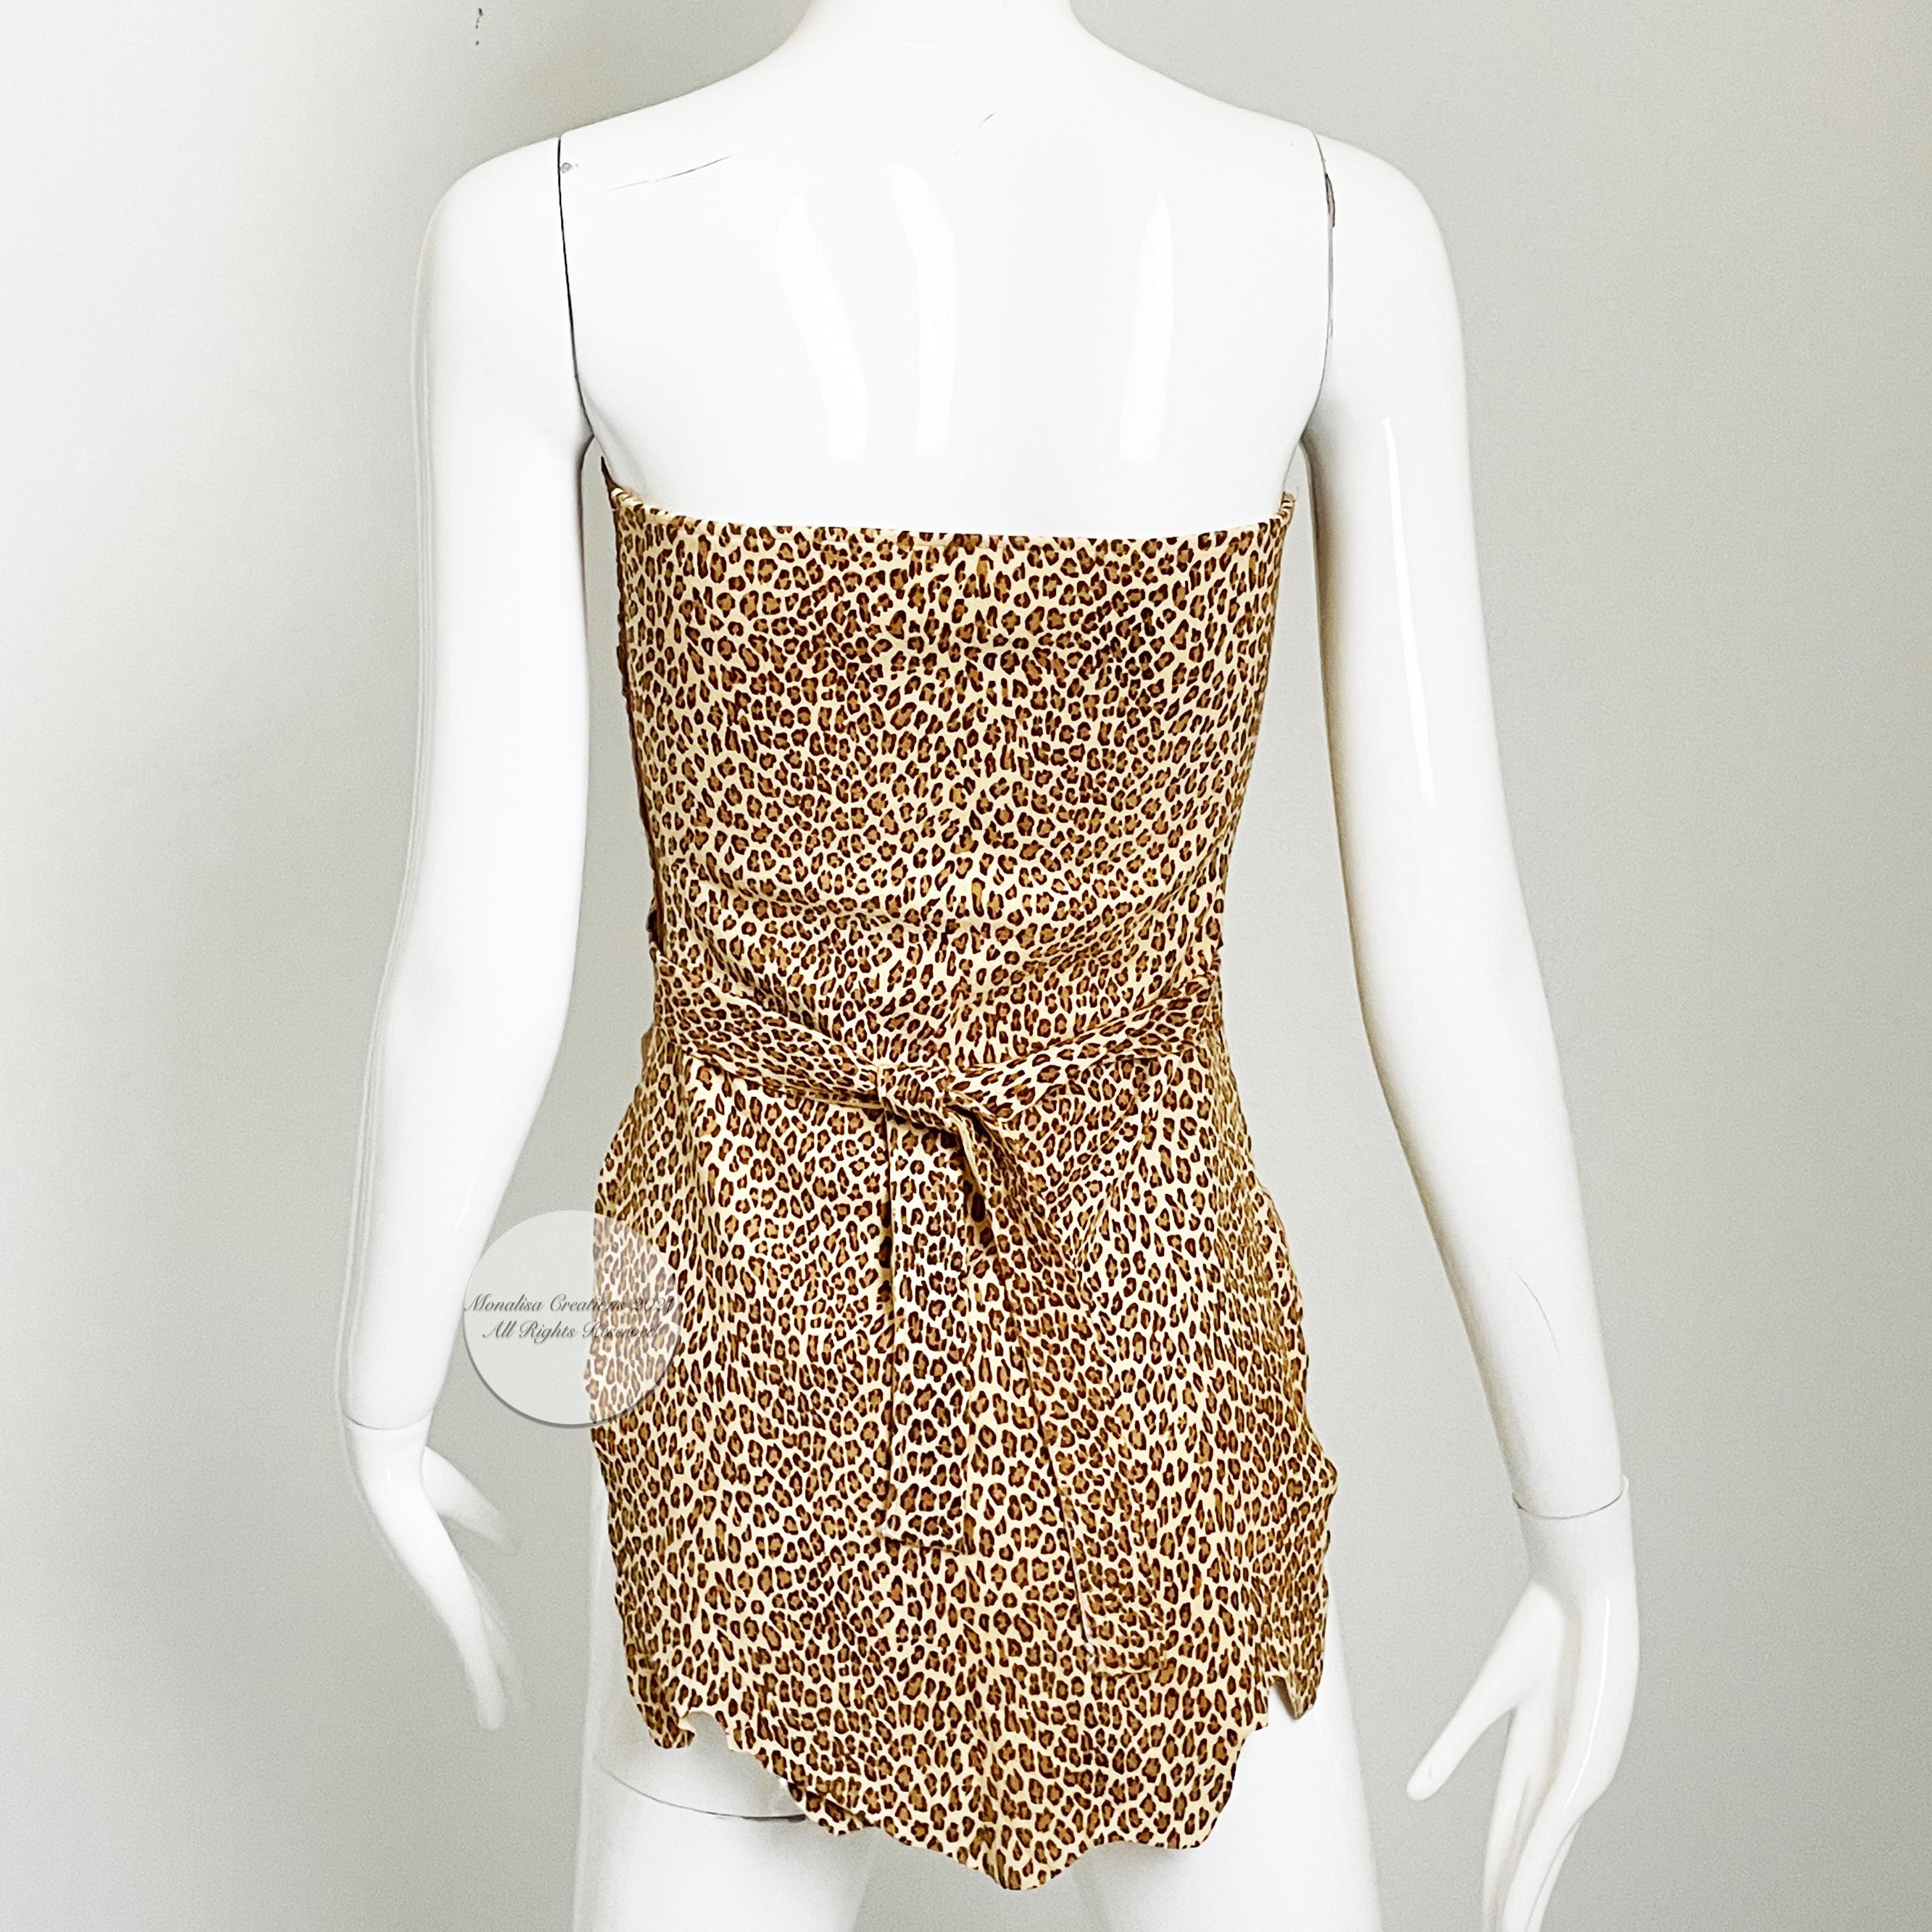 Vintage Norma Kamali OMO Halter Top with Wrap Ties Leopard Print Leather HTF 1